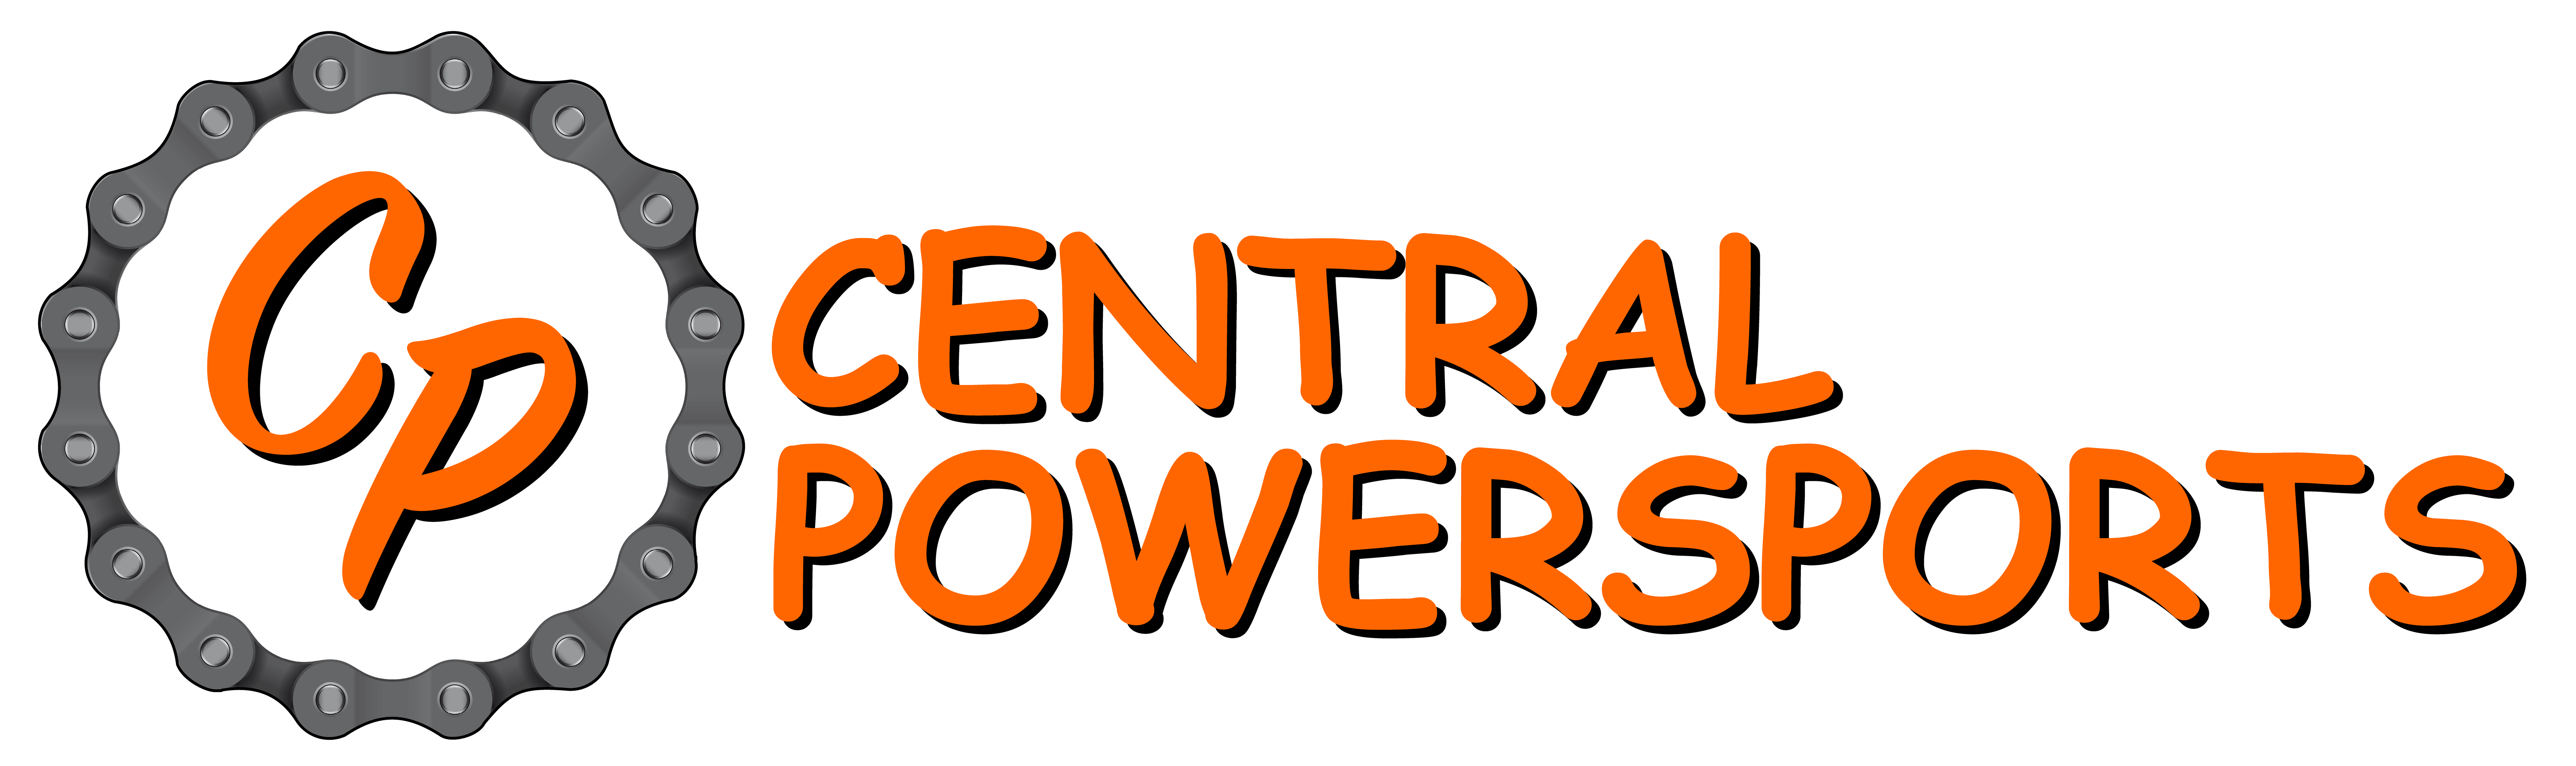 Central Powersports